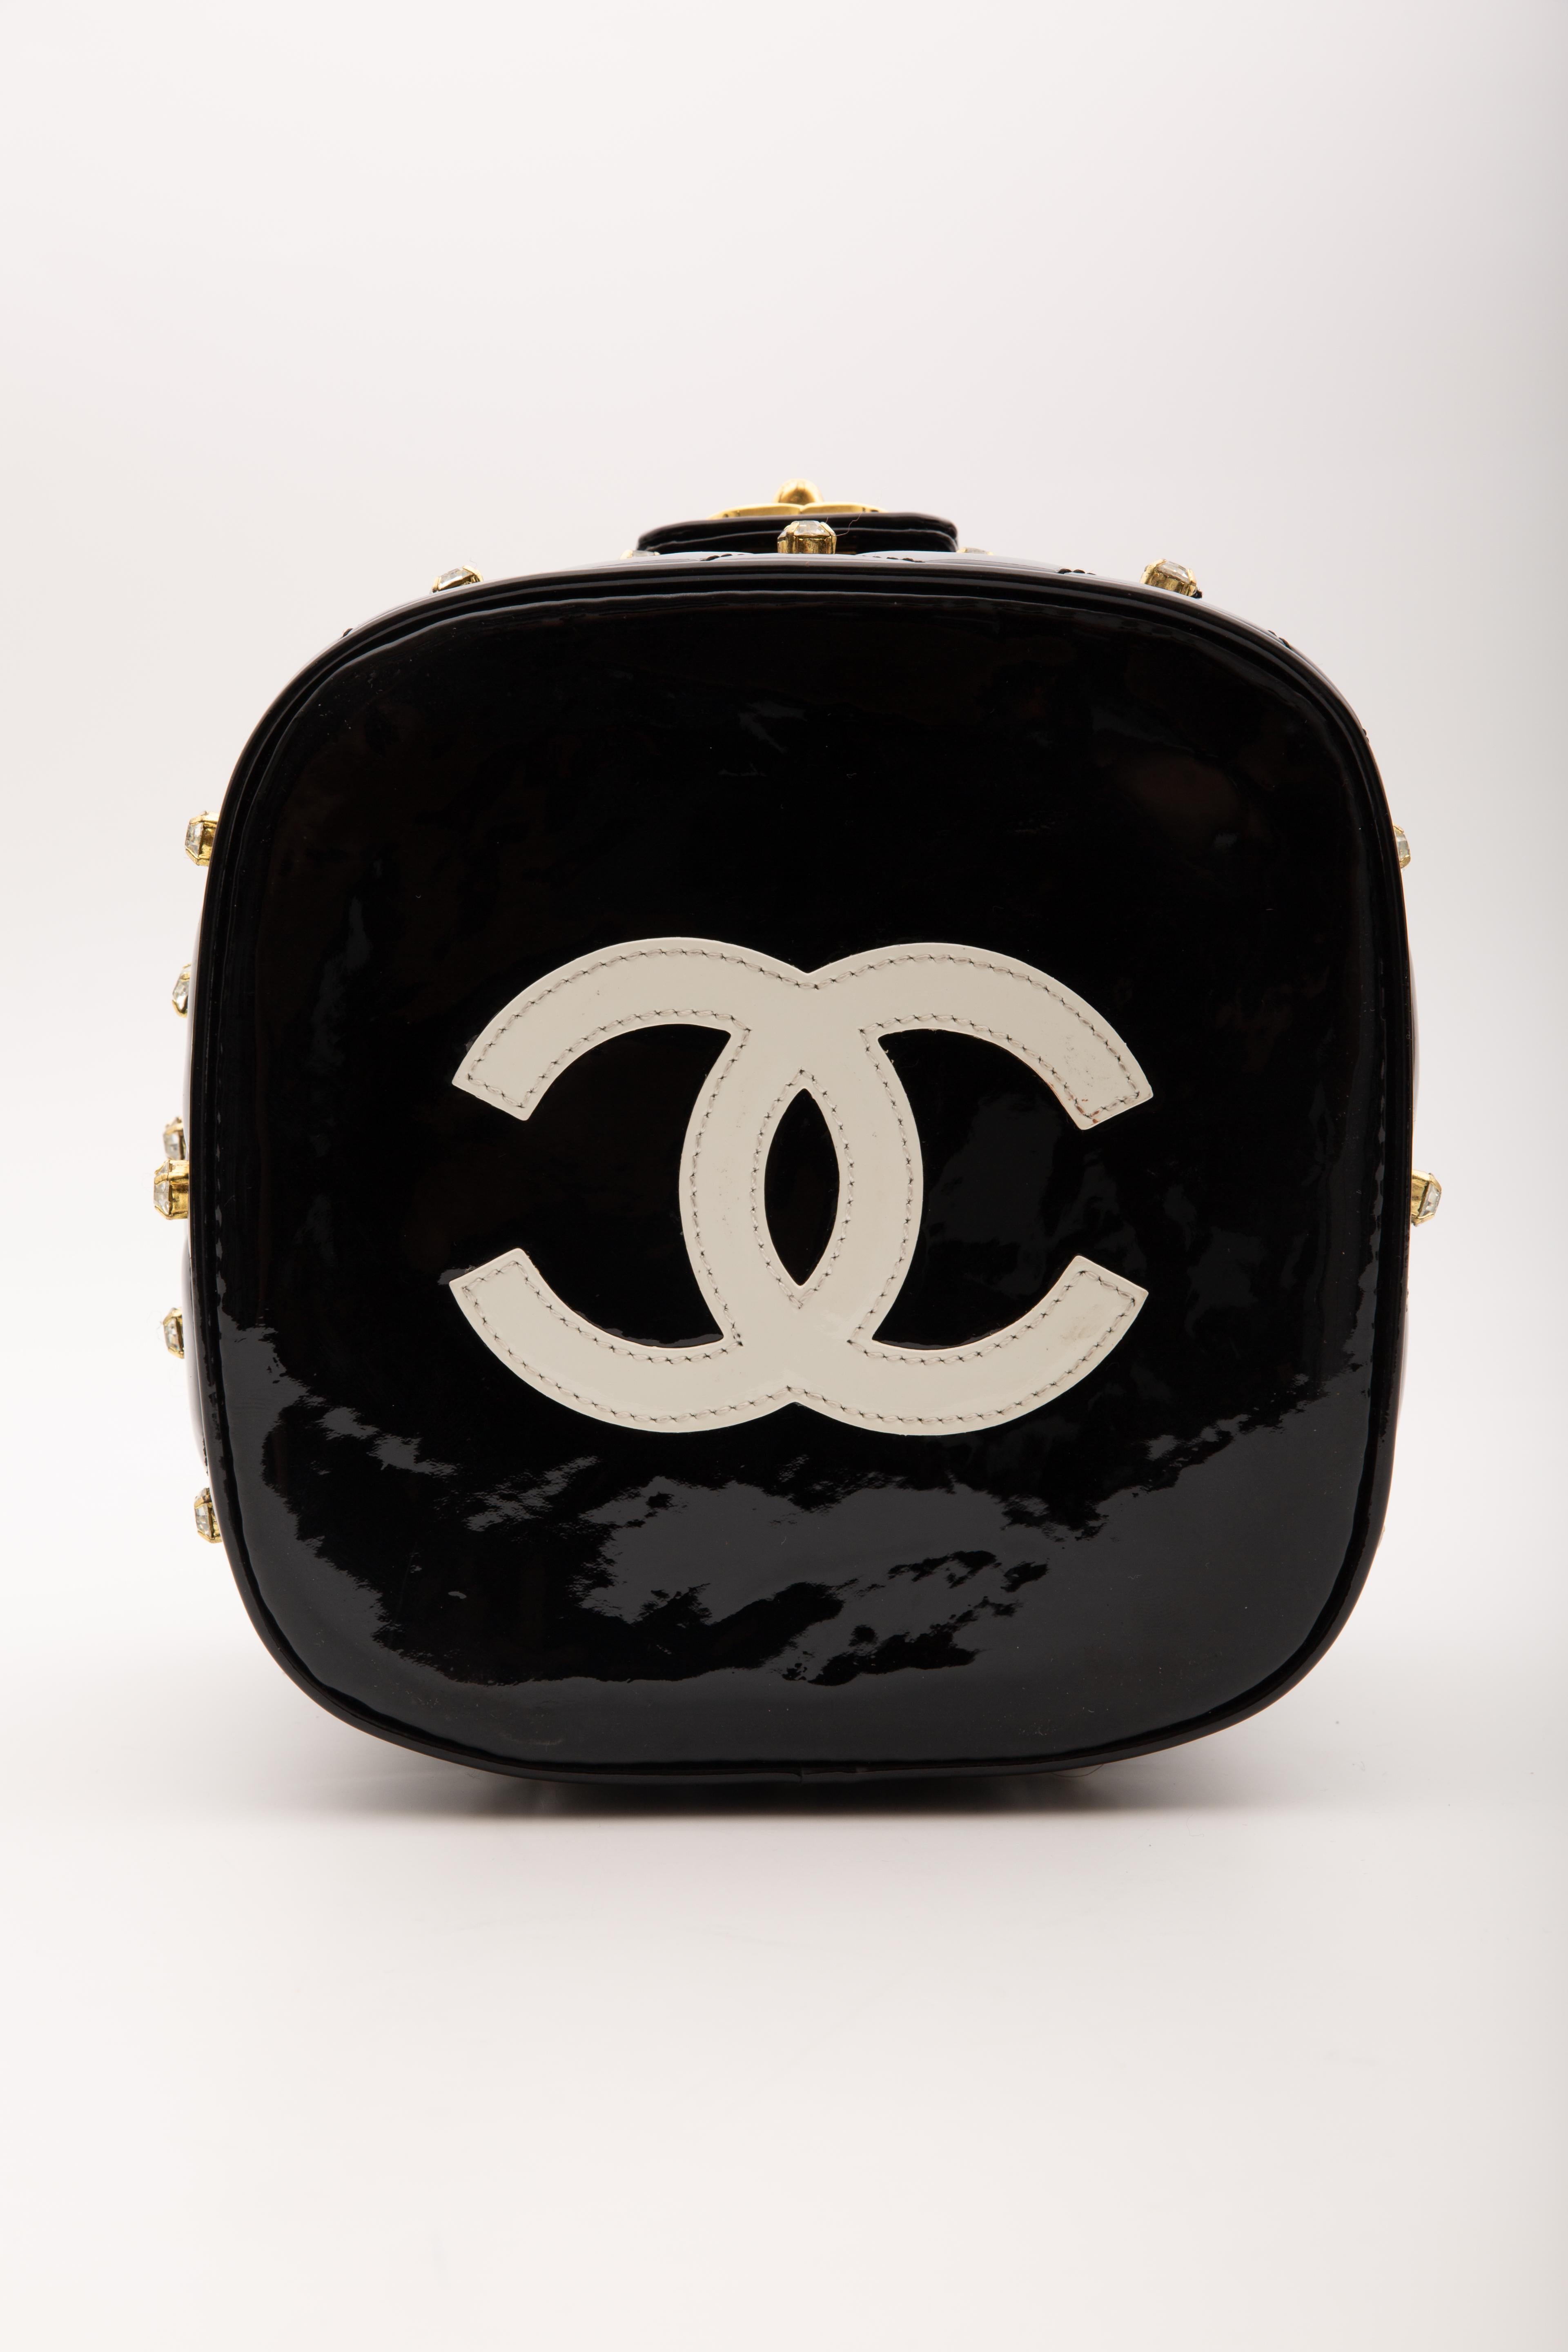 Women's or Men's Chanel Vintage Patent Leather Quilted Crystal CC Vanity Handbag (Circa 1991)